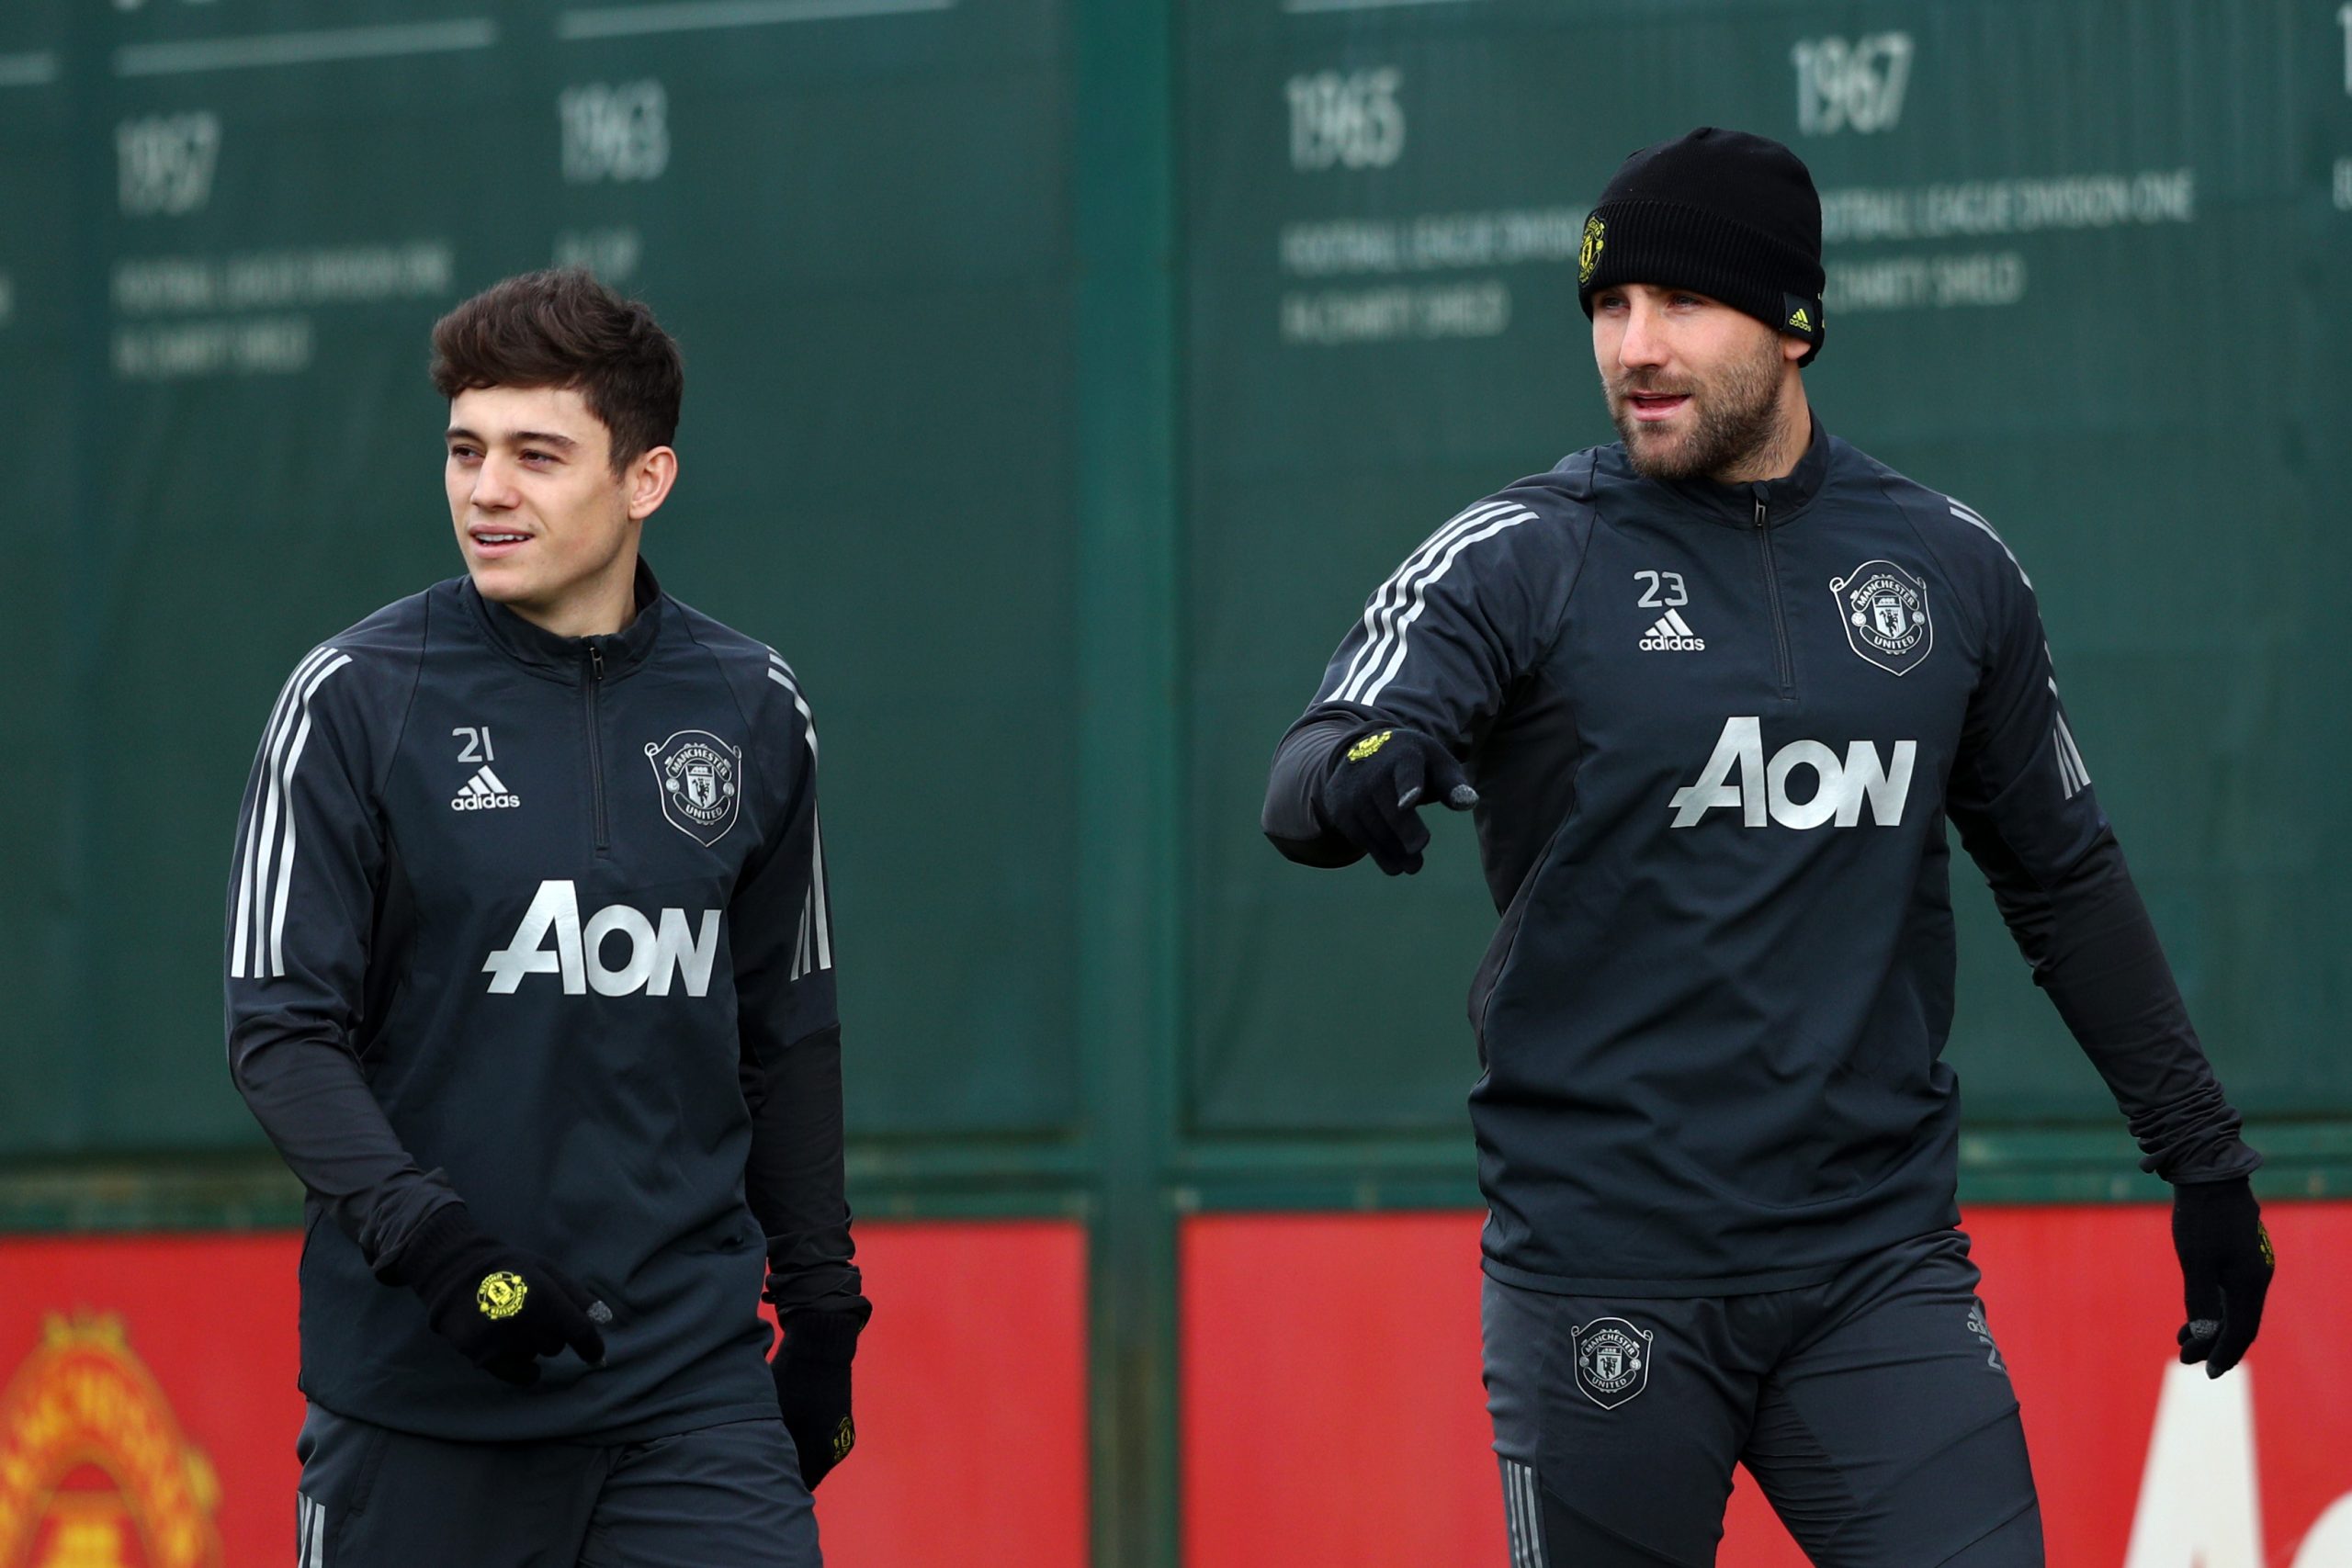 Daniel James and Luke Shaw of Manchester United